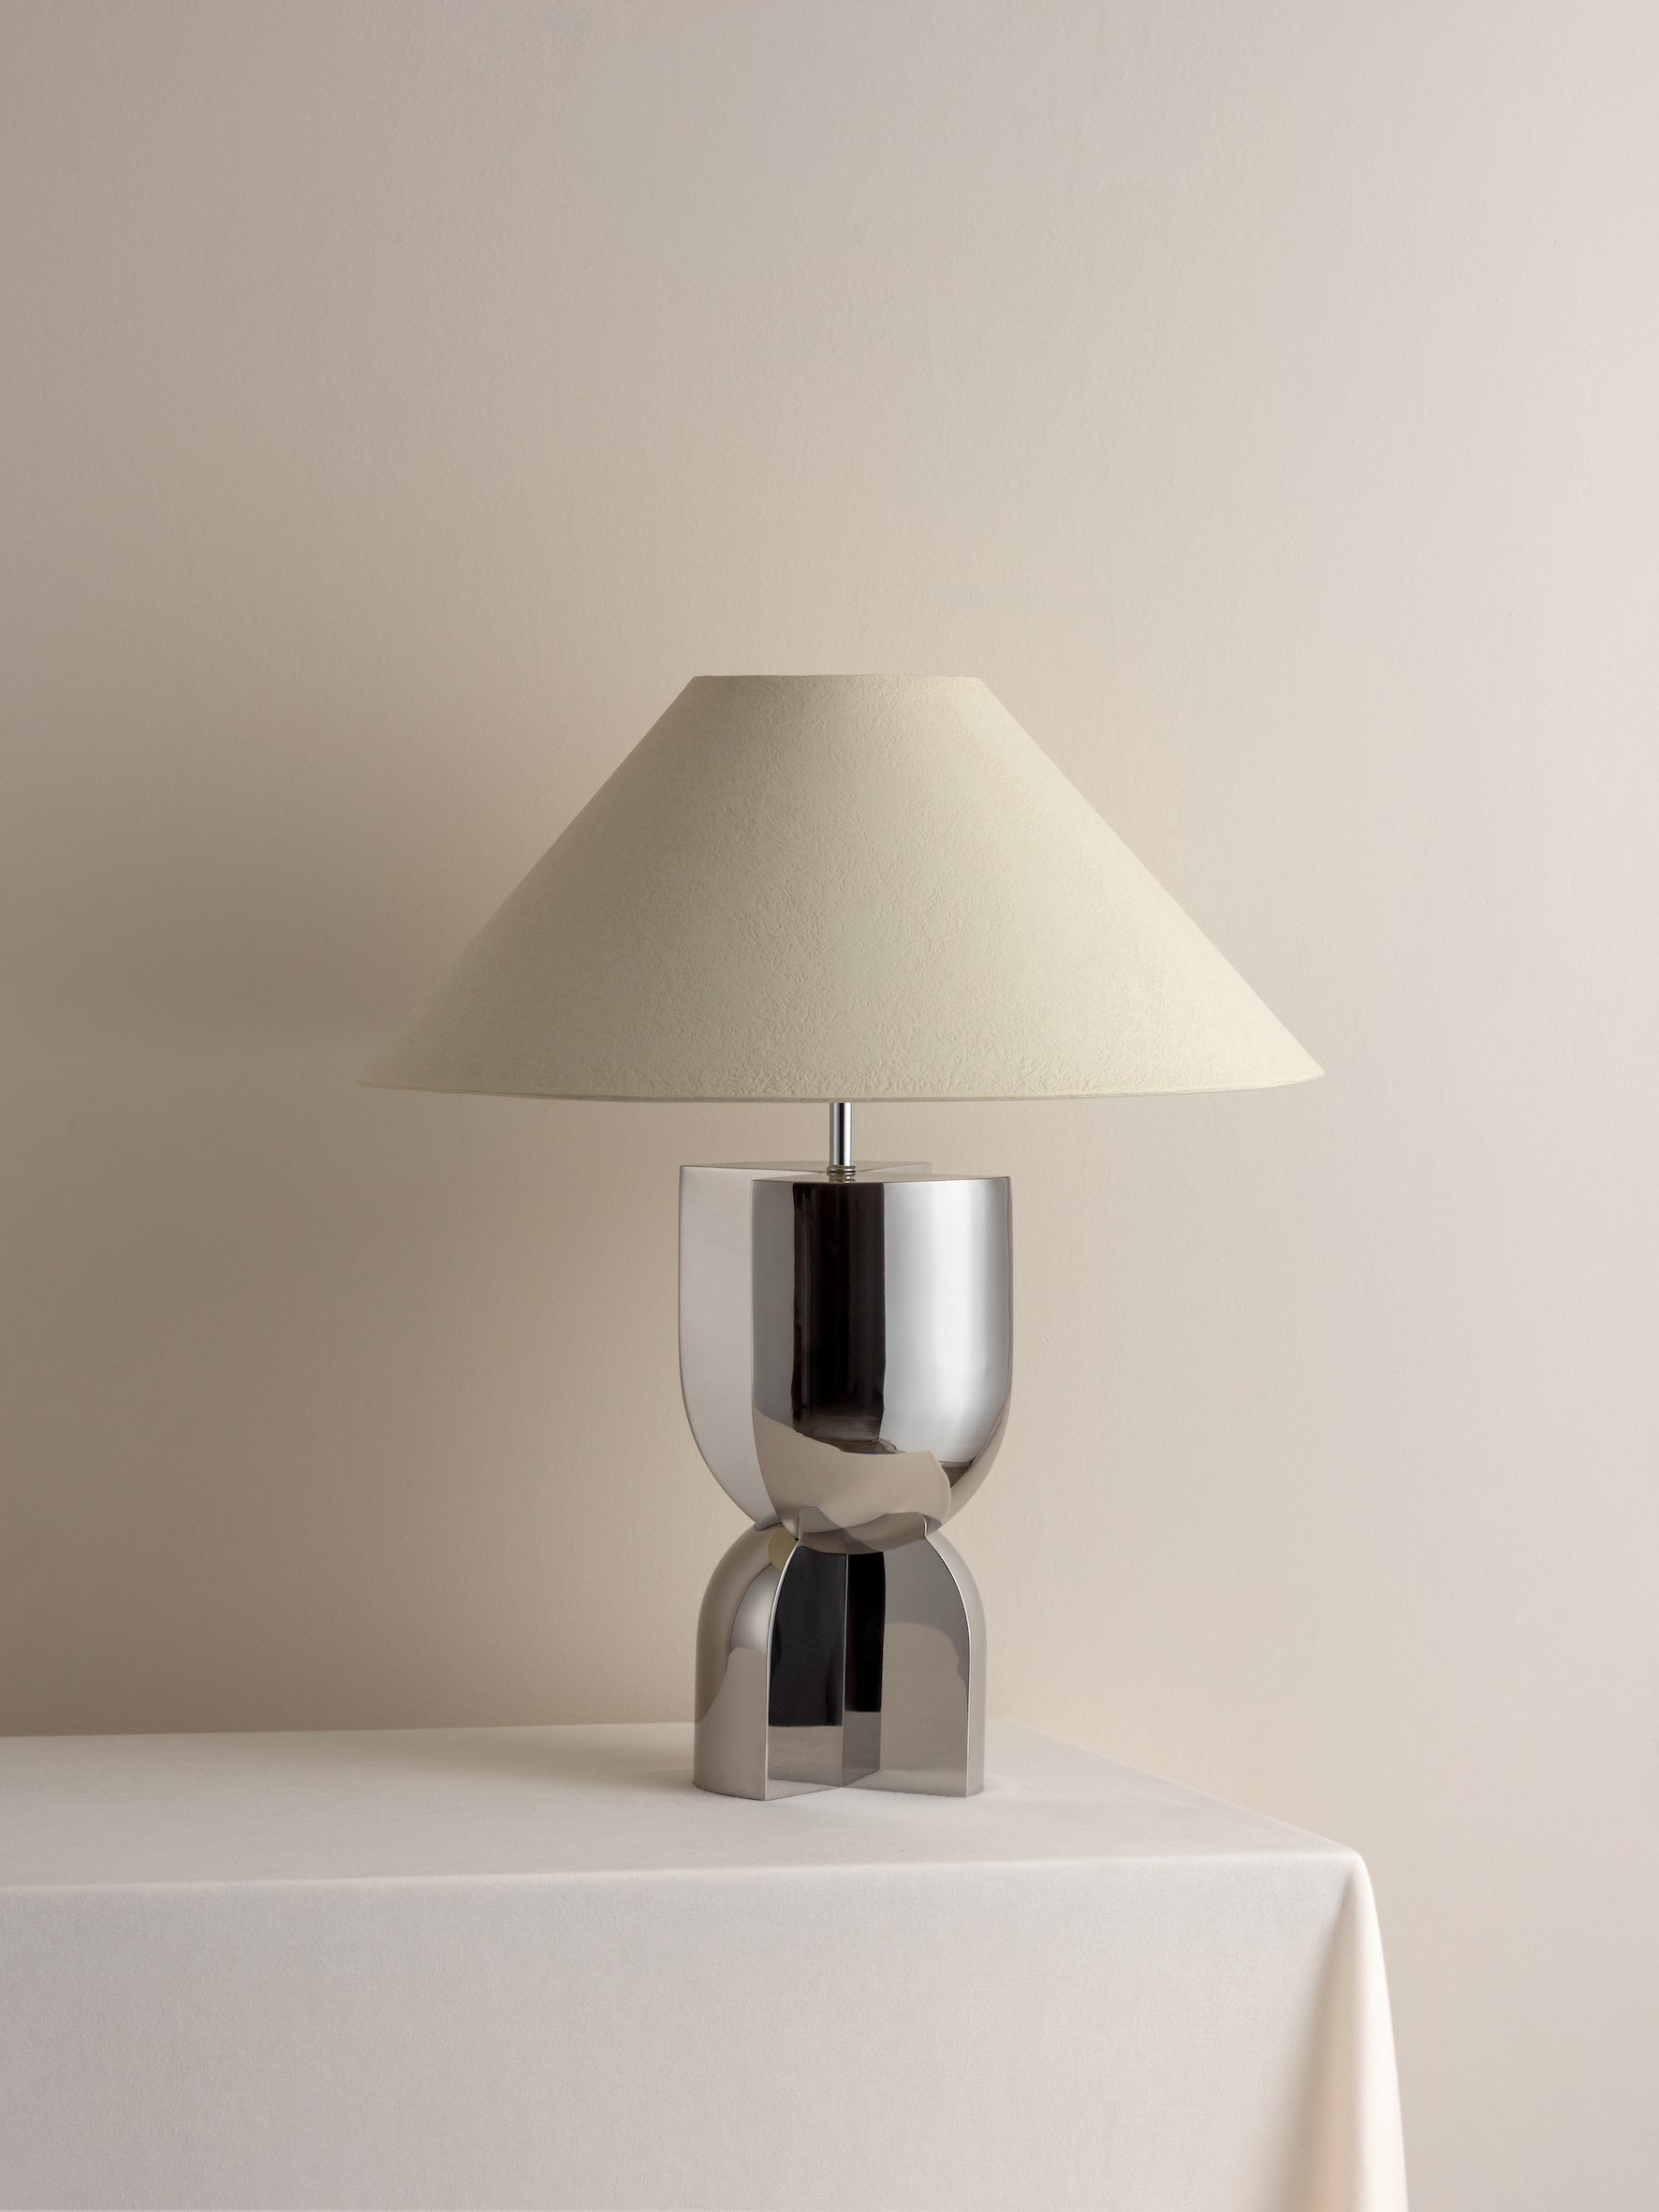 Editions chrome lamp with + plaster shade | Table Lamp | Lights & Lamps | UK | Modern Affordable Designer Lighting